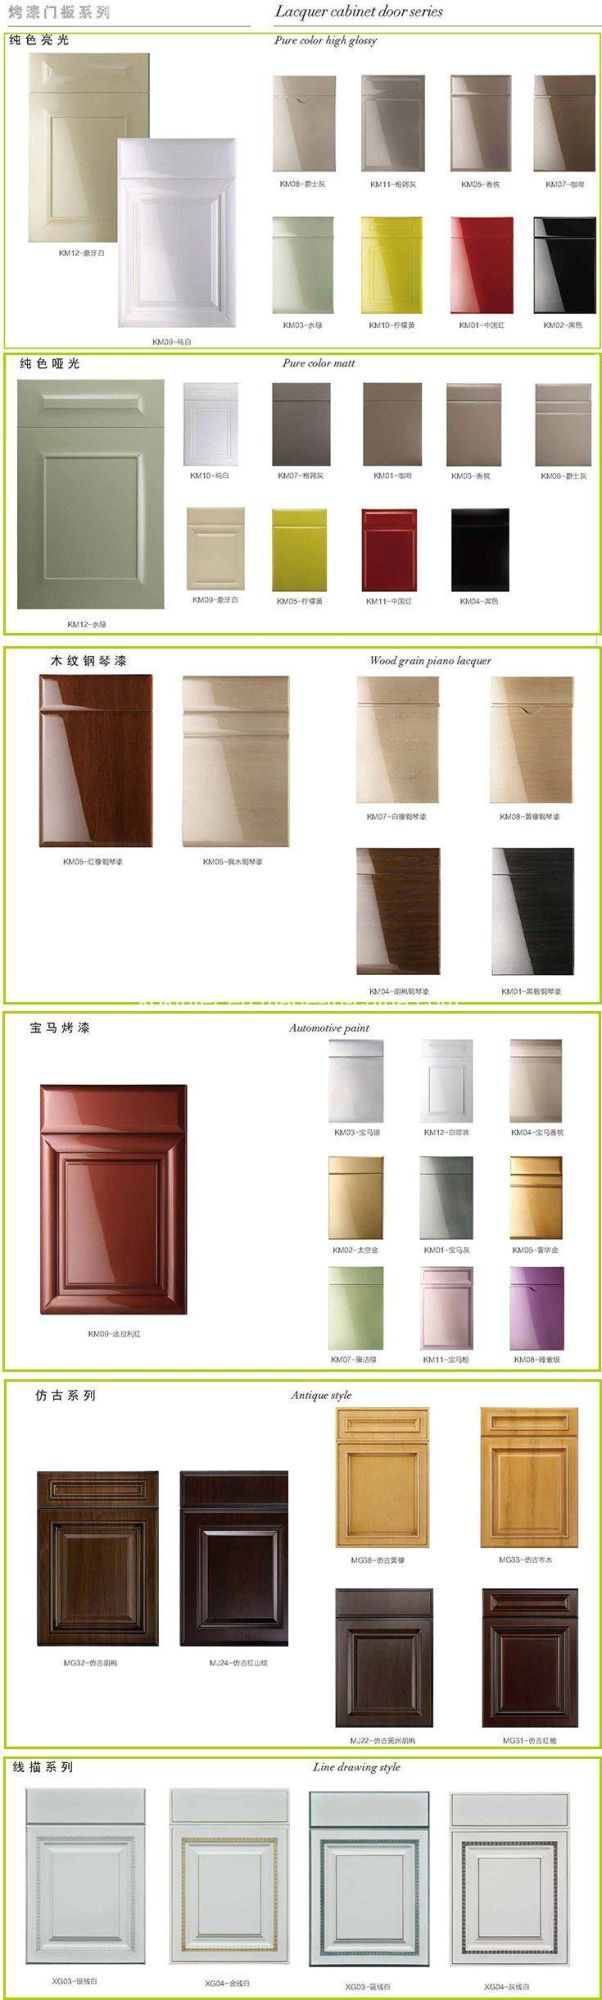 MDF/MFC/Plywood Particle Board Wardrobe Series of Kok012